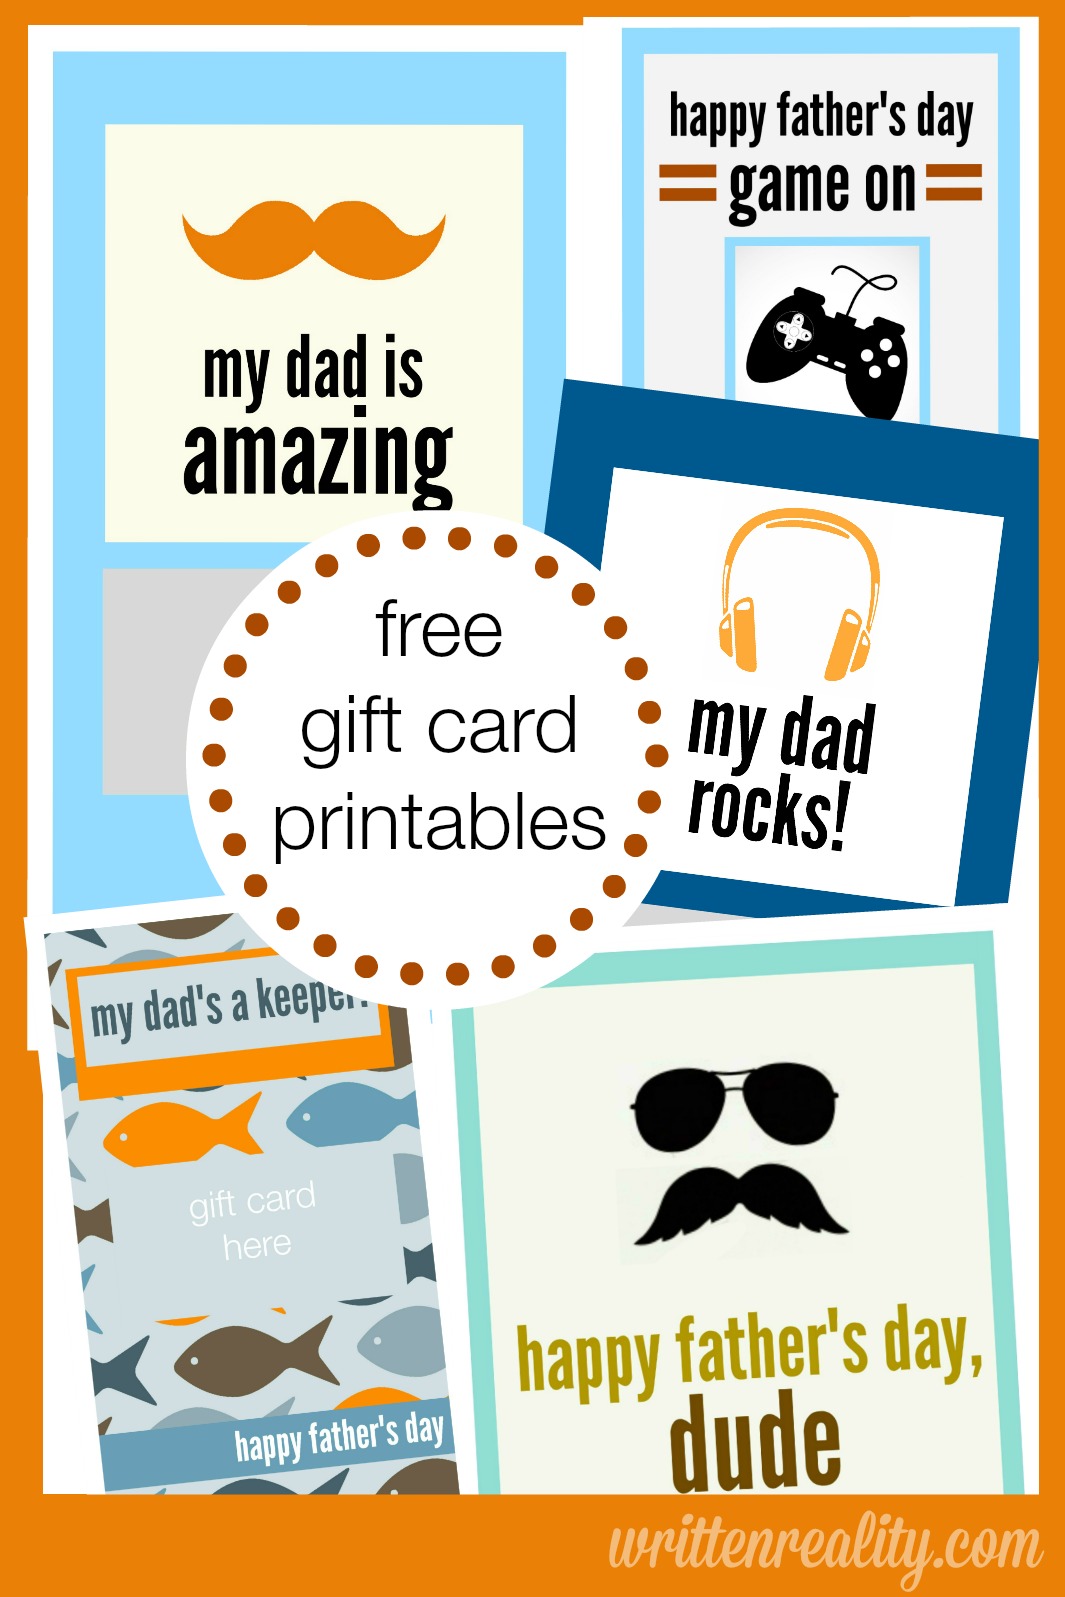 free-printable-father-s-day-tie-gift-tags-tie-gifts-gift-tags